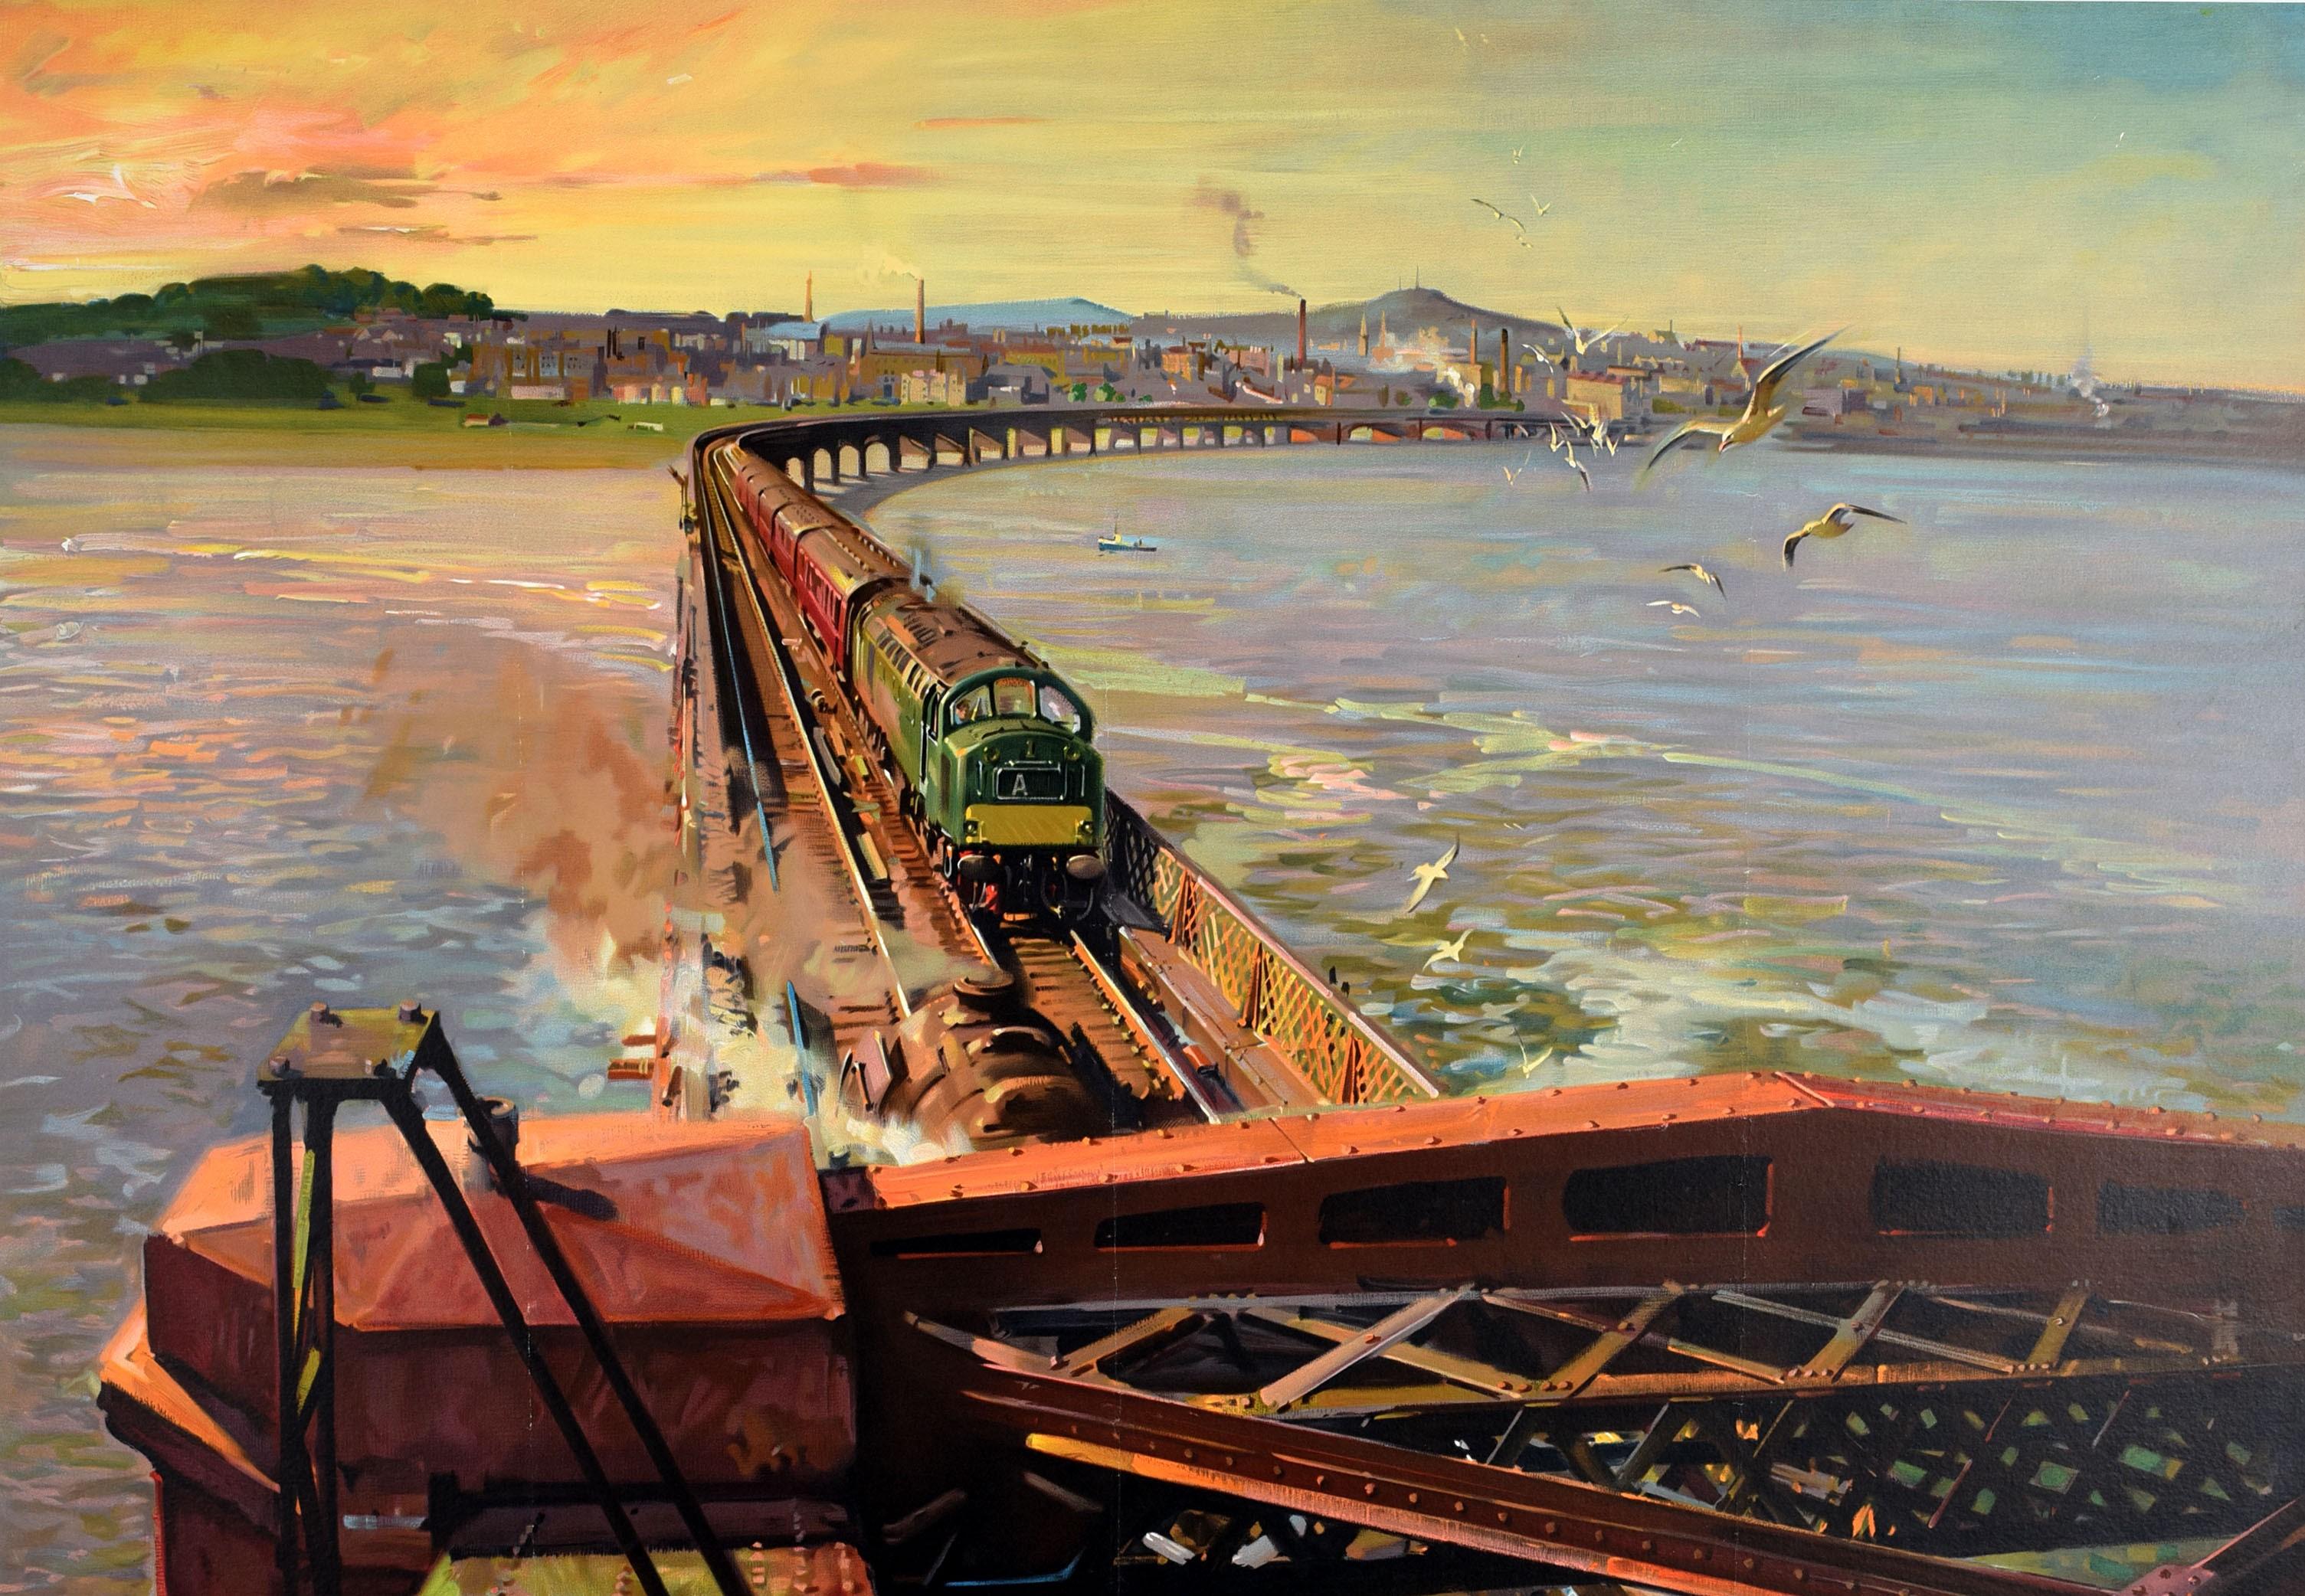 Original vintage railway poster for Tay Bridge See Scotland by Train featuring a stunning painting by the notable British artist Terence Tenison Cuneo (1907-1996) depicting a train approaching the viewer on the Tay Bridge over the Firth of Tay